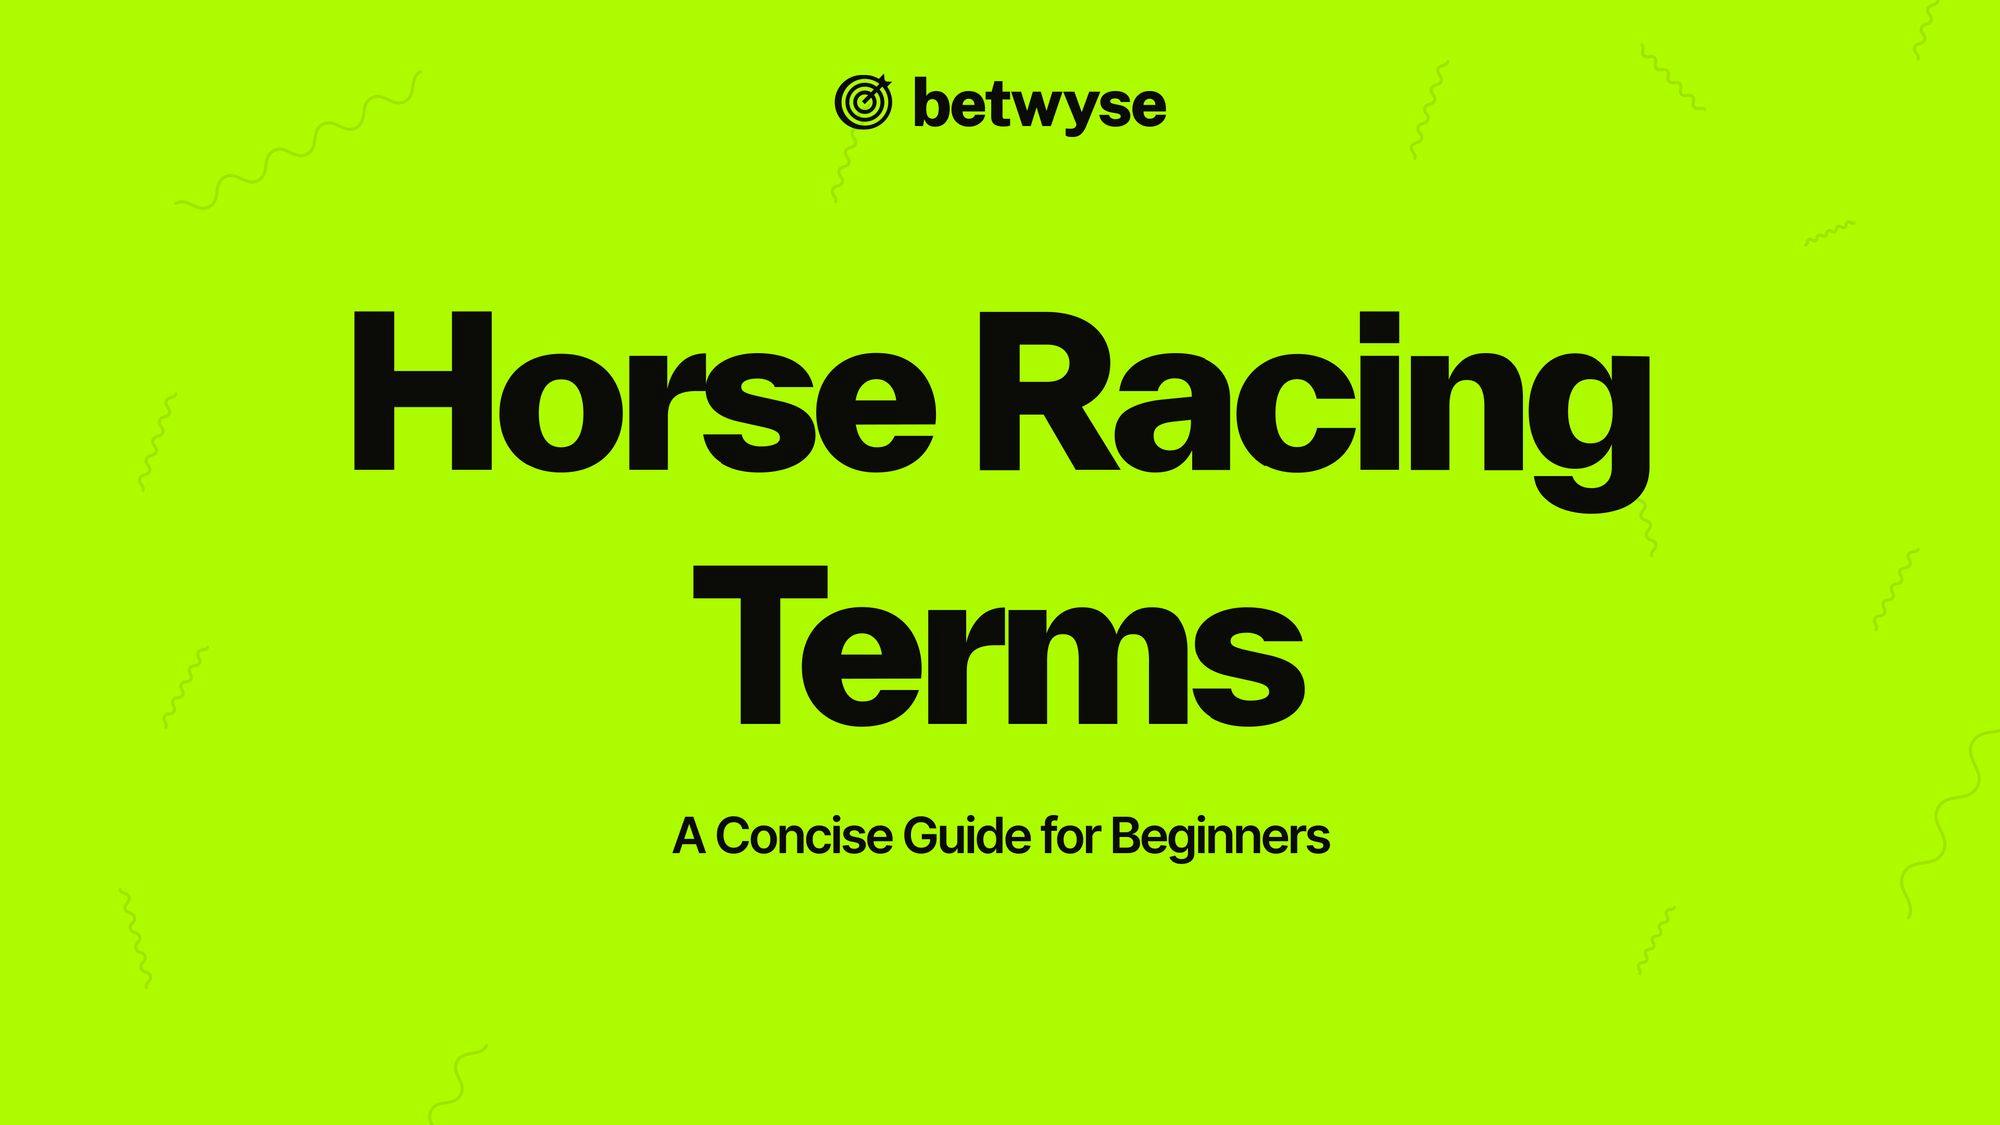 horse racing terms image